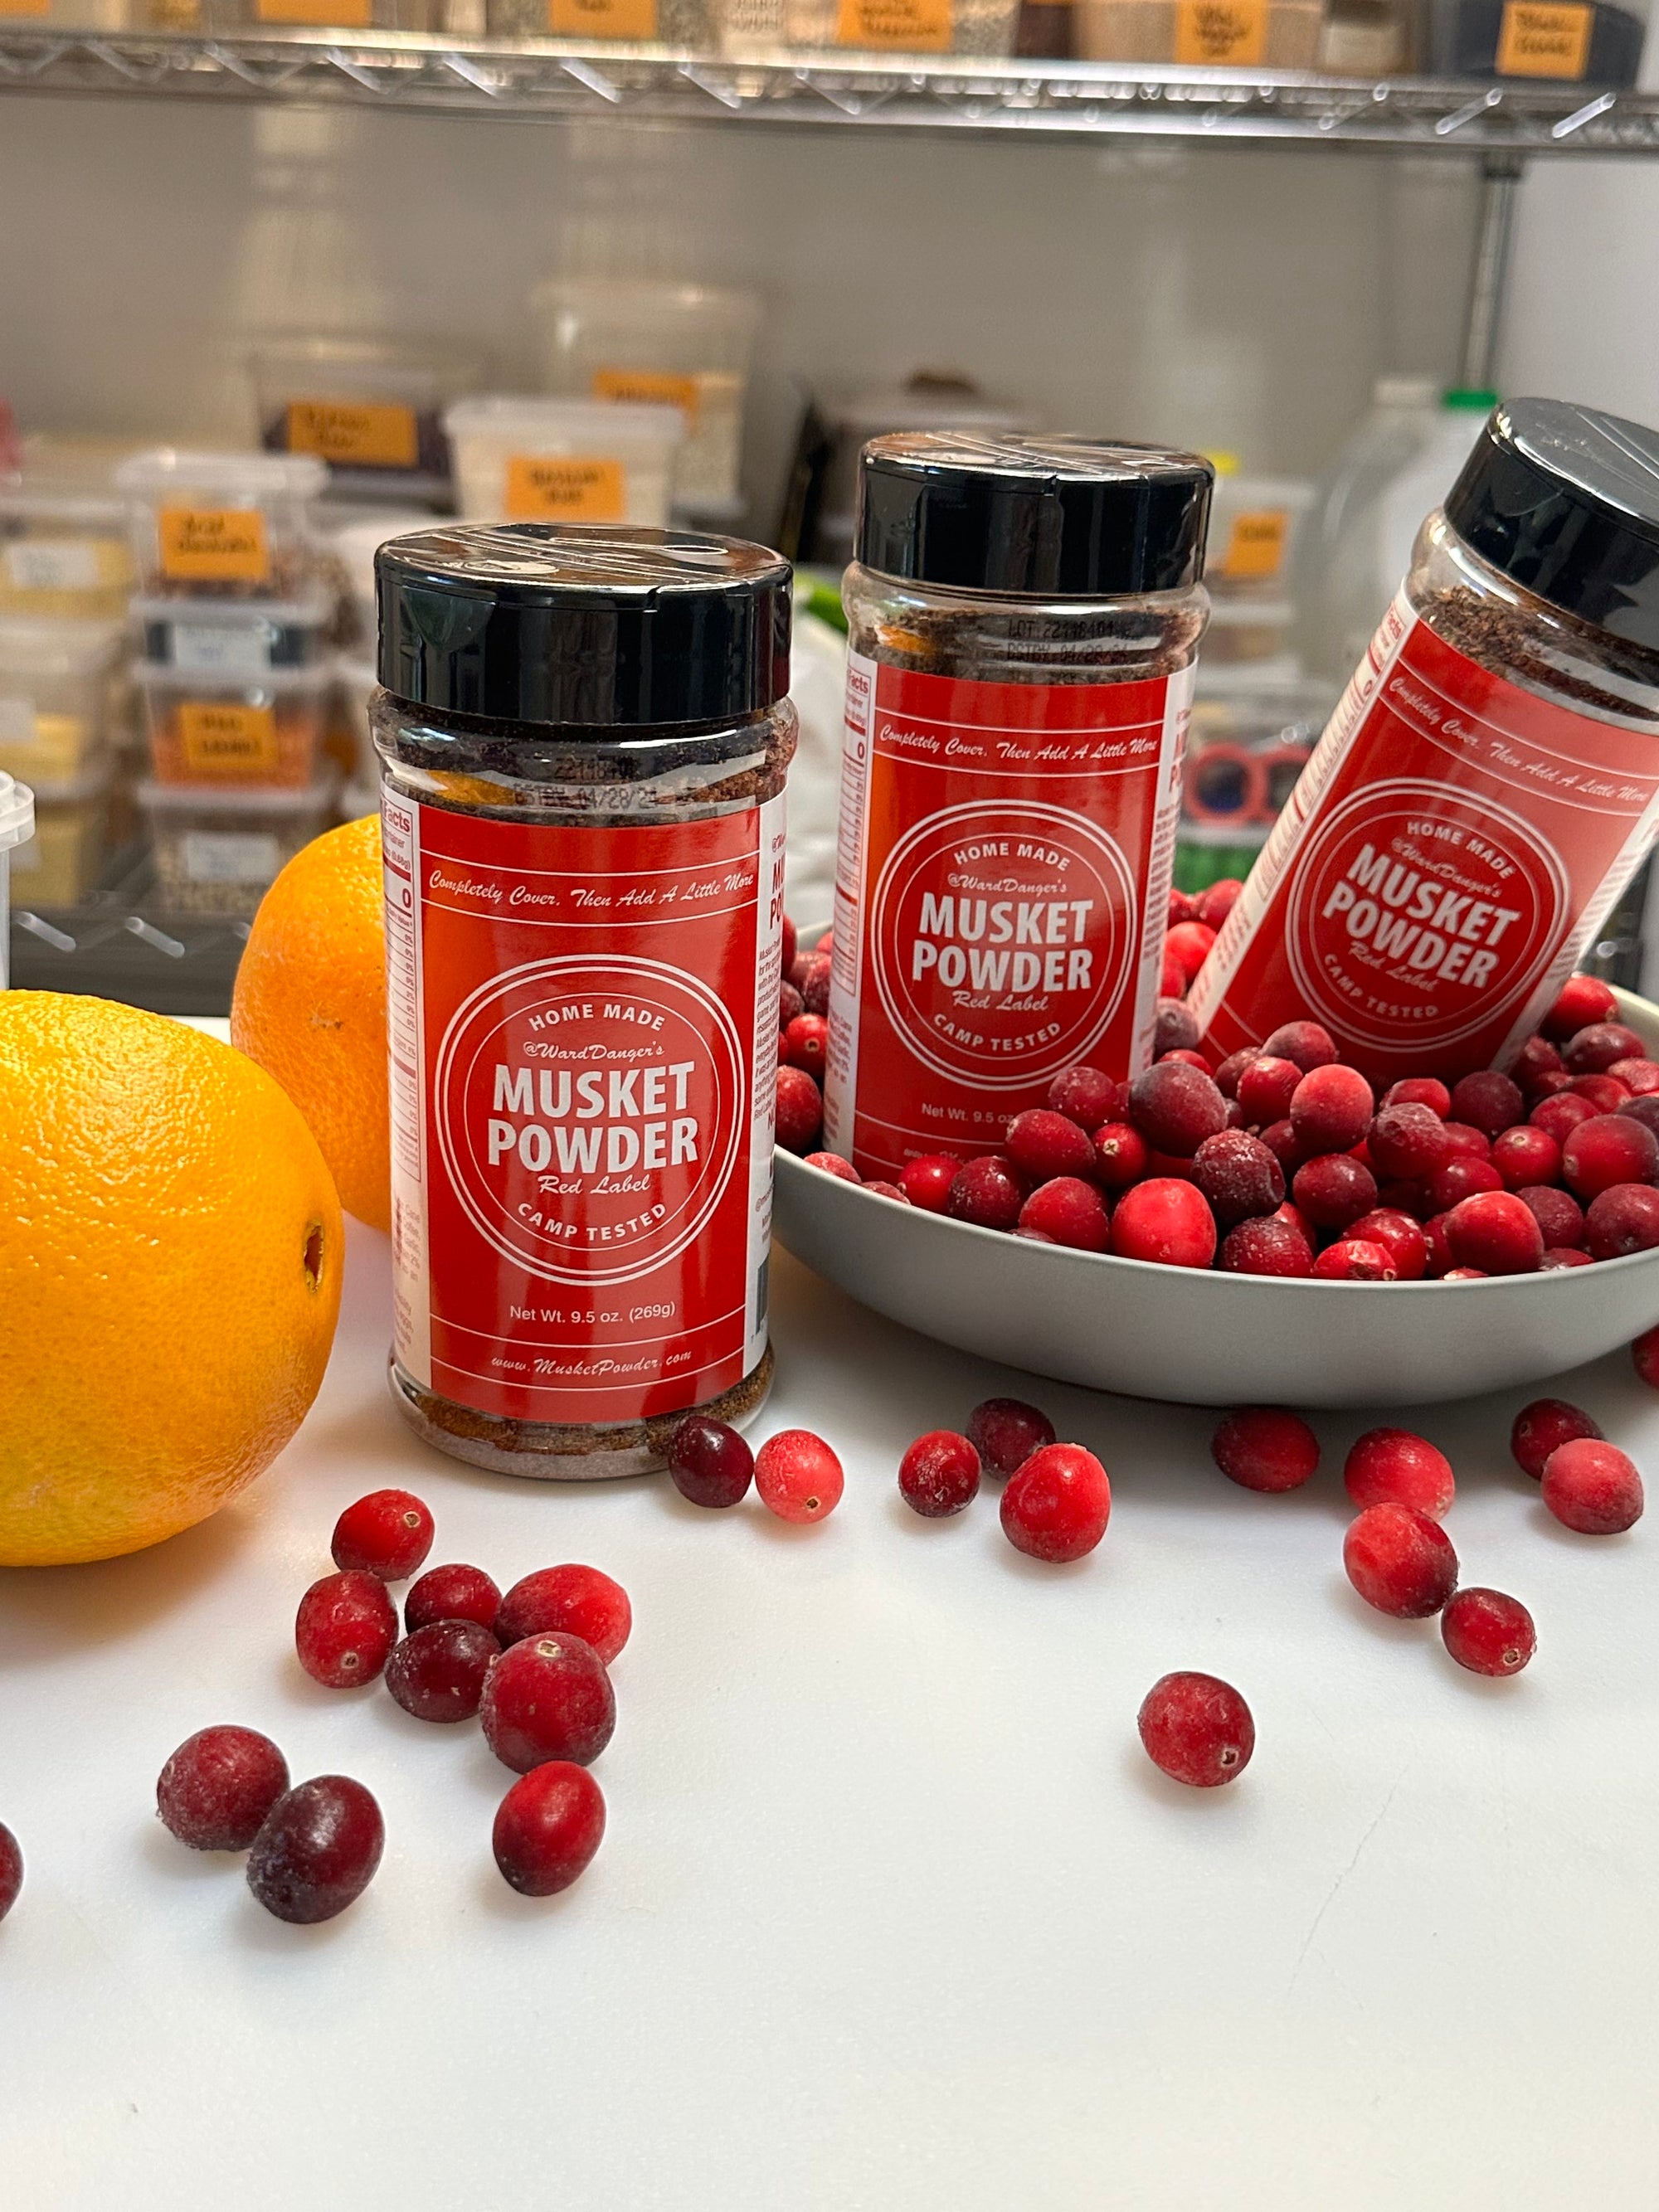 Sweet & Spicy Cranberry Sauce with Red Label Musket Powder Seasoning